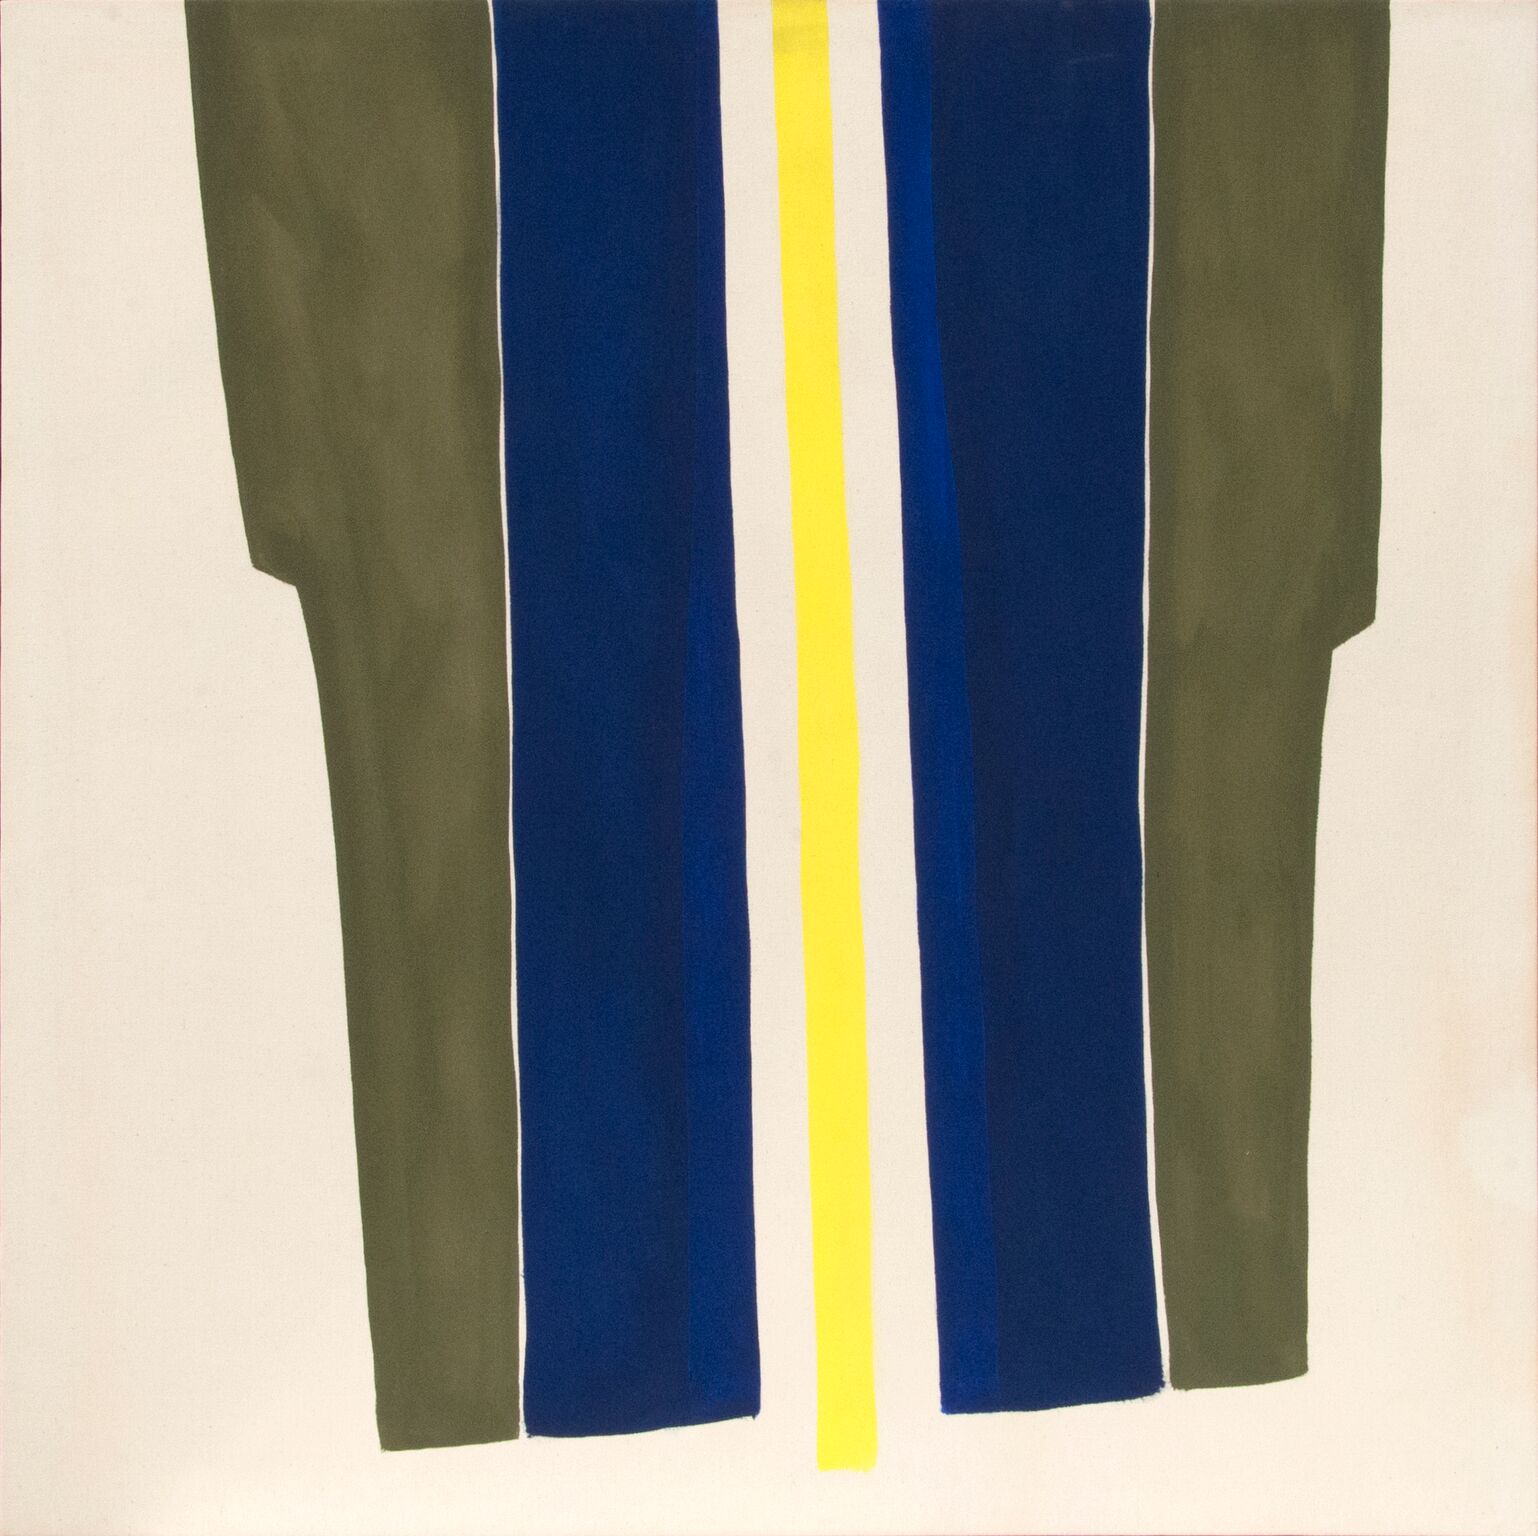  Clinton Hill  Untitled , c. 1960s acrylic on canvas 49 1/2 x 49 1/2 in (125.73 x 125.73 cm) 